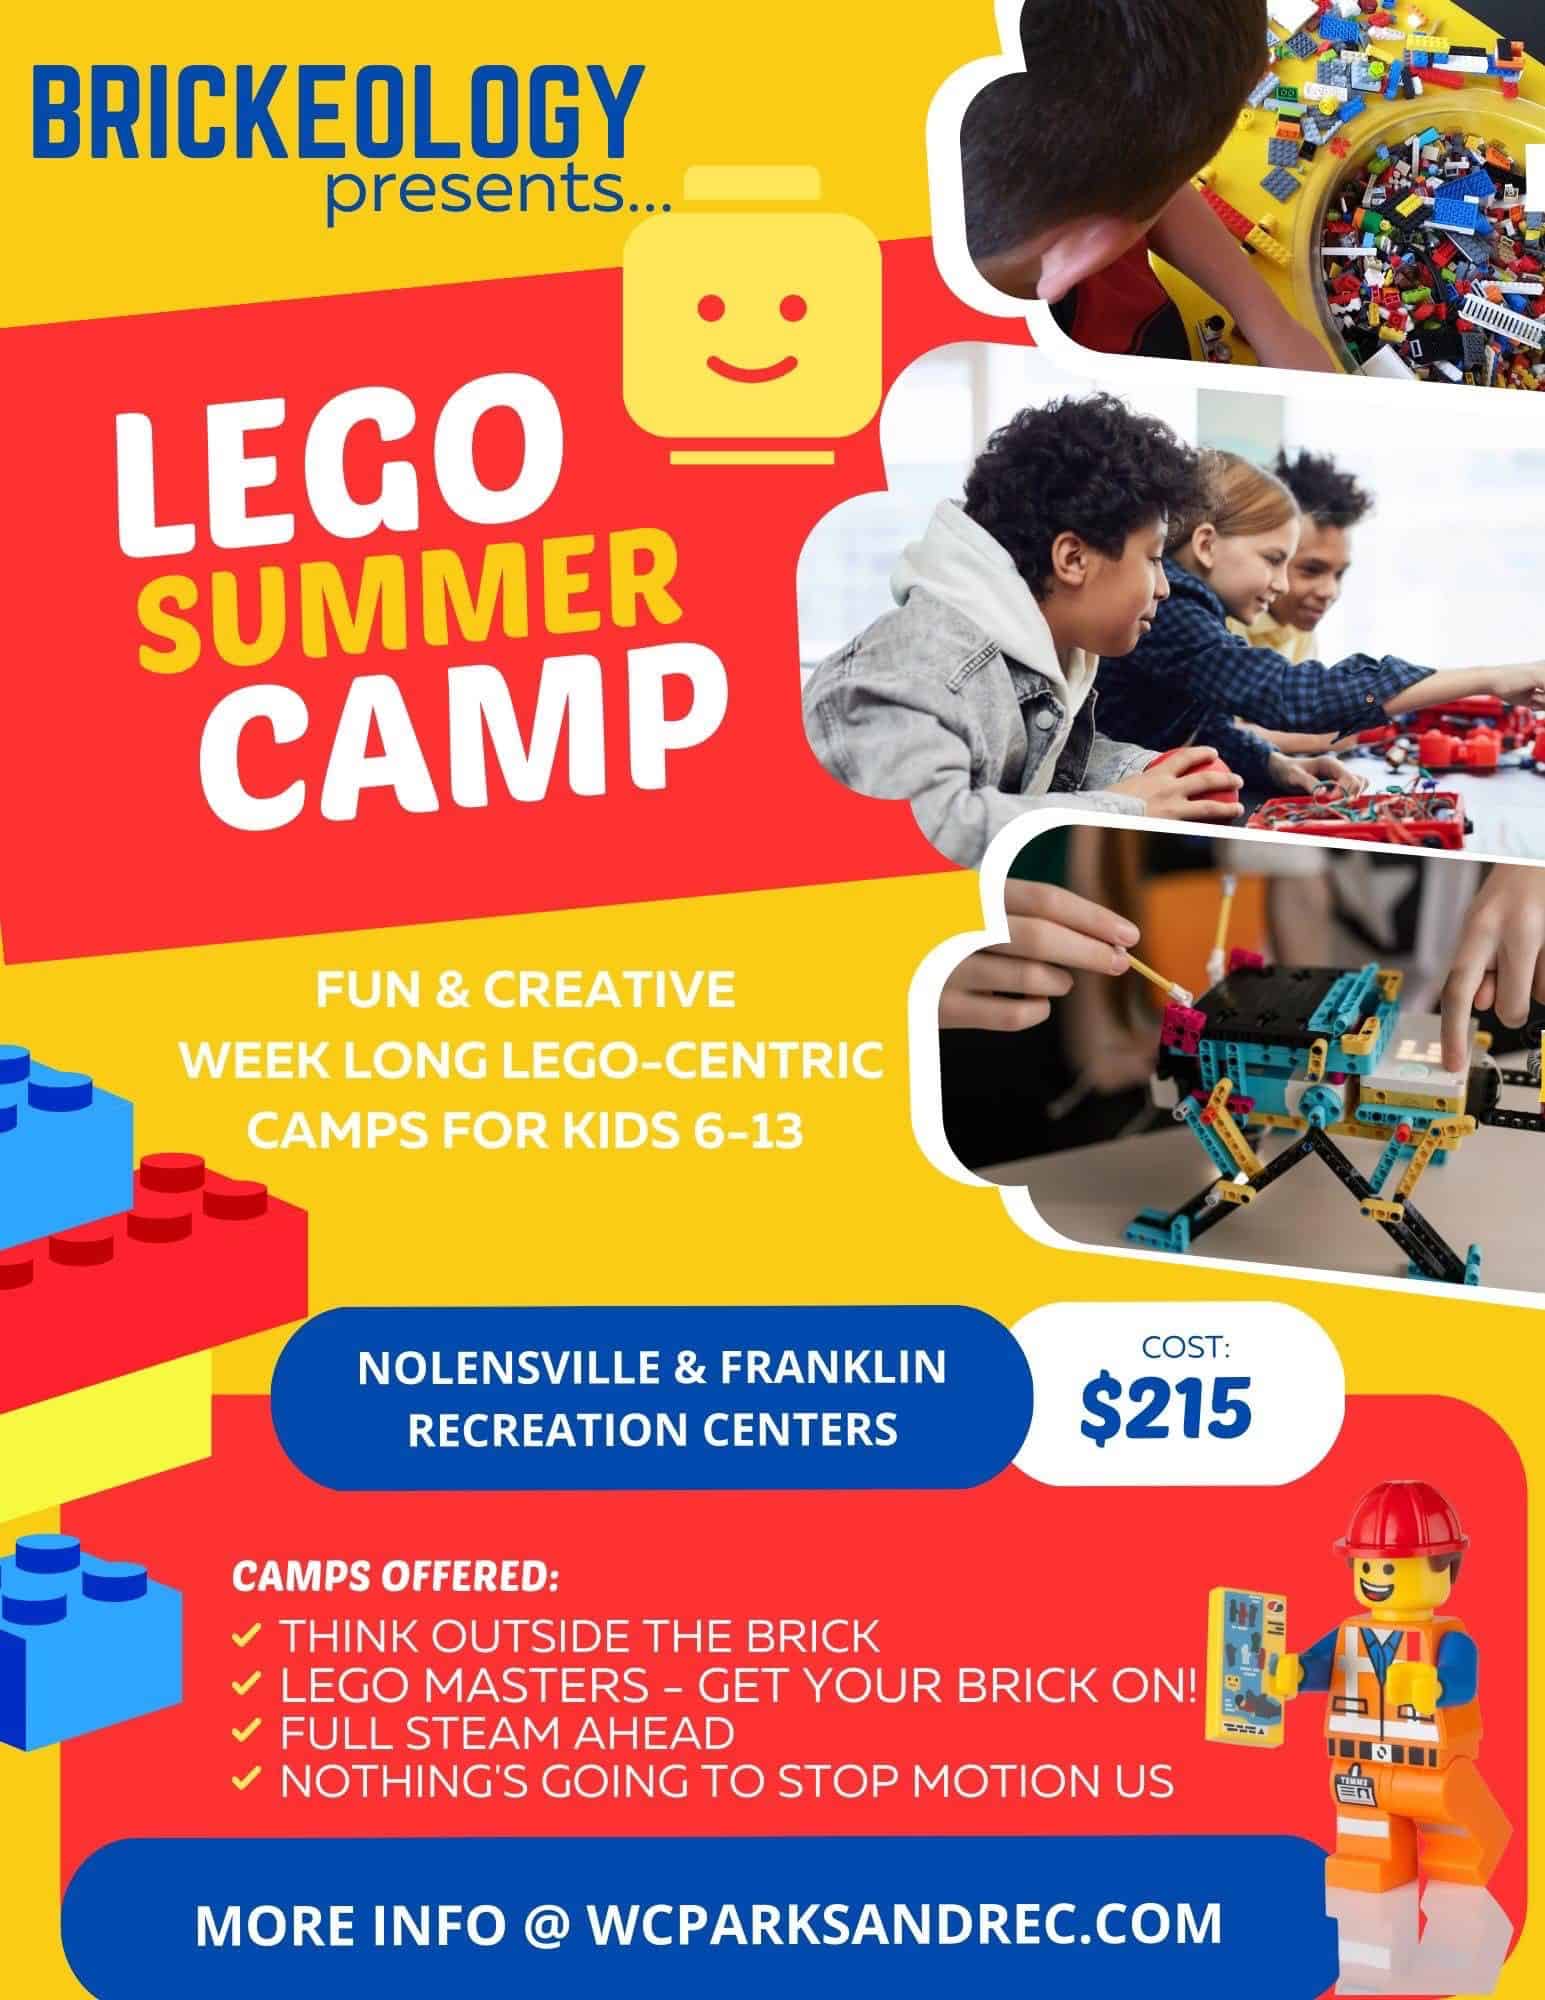 Brickeology Lego-themed summer camps in Franklin & Nolensville, TN, activities for kids age 6-13.